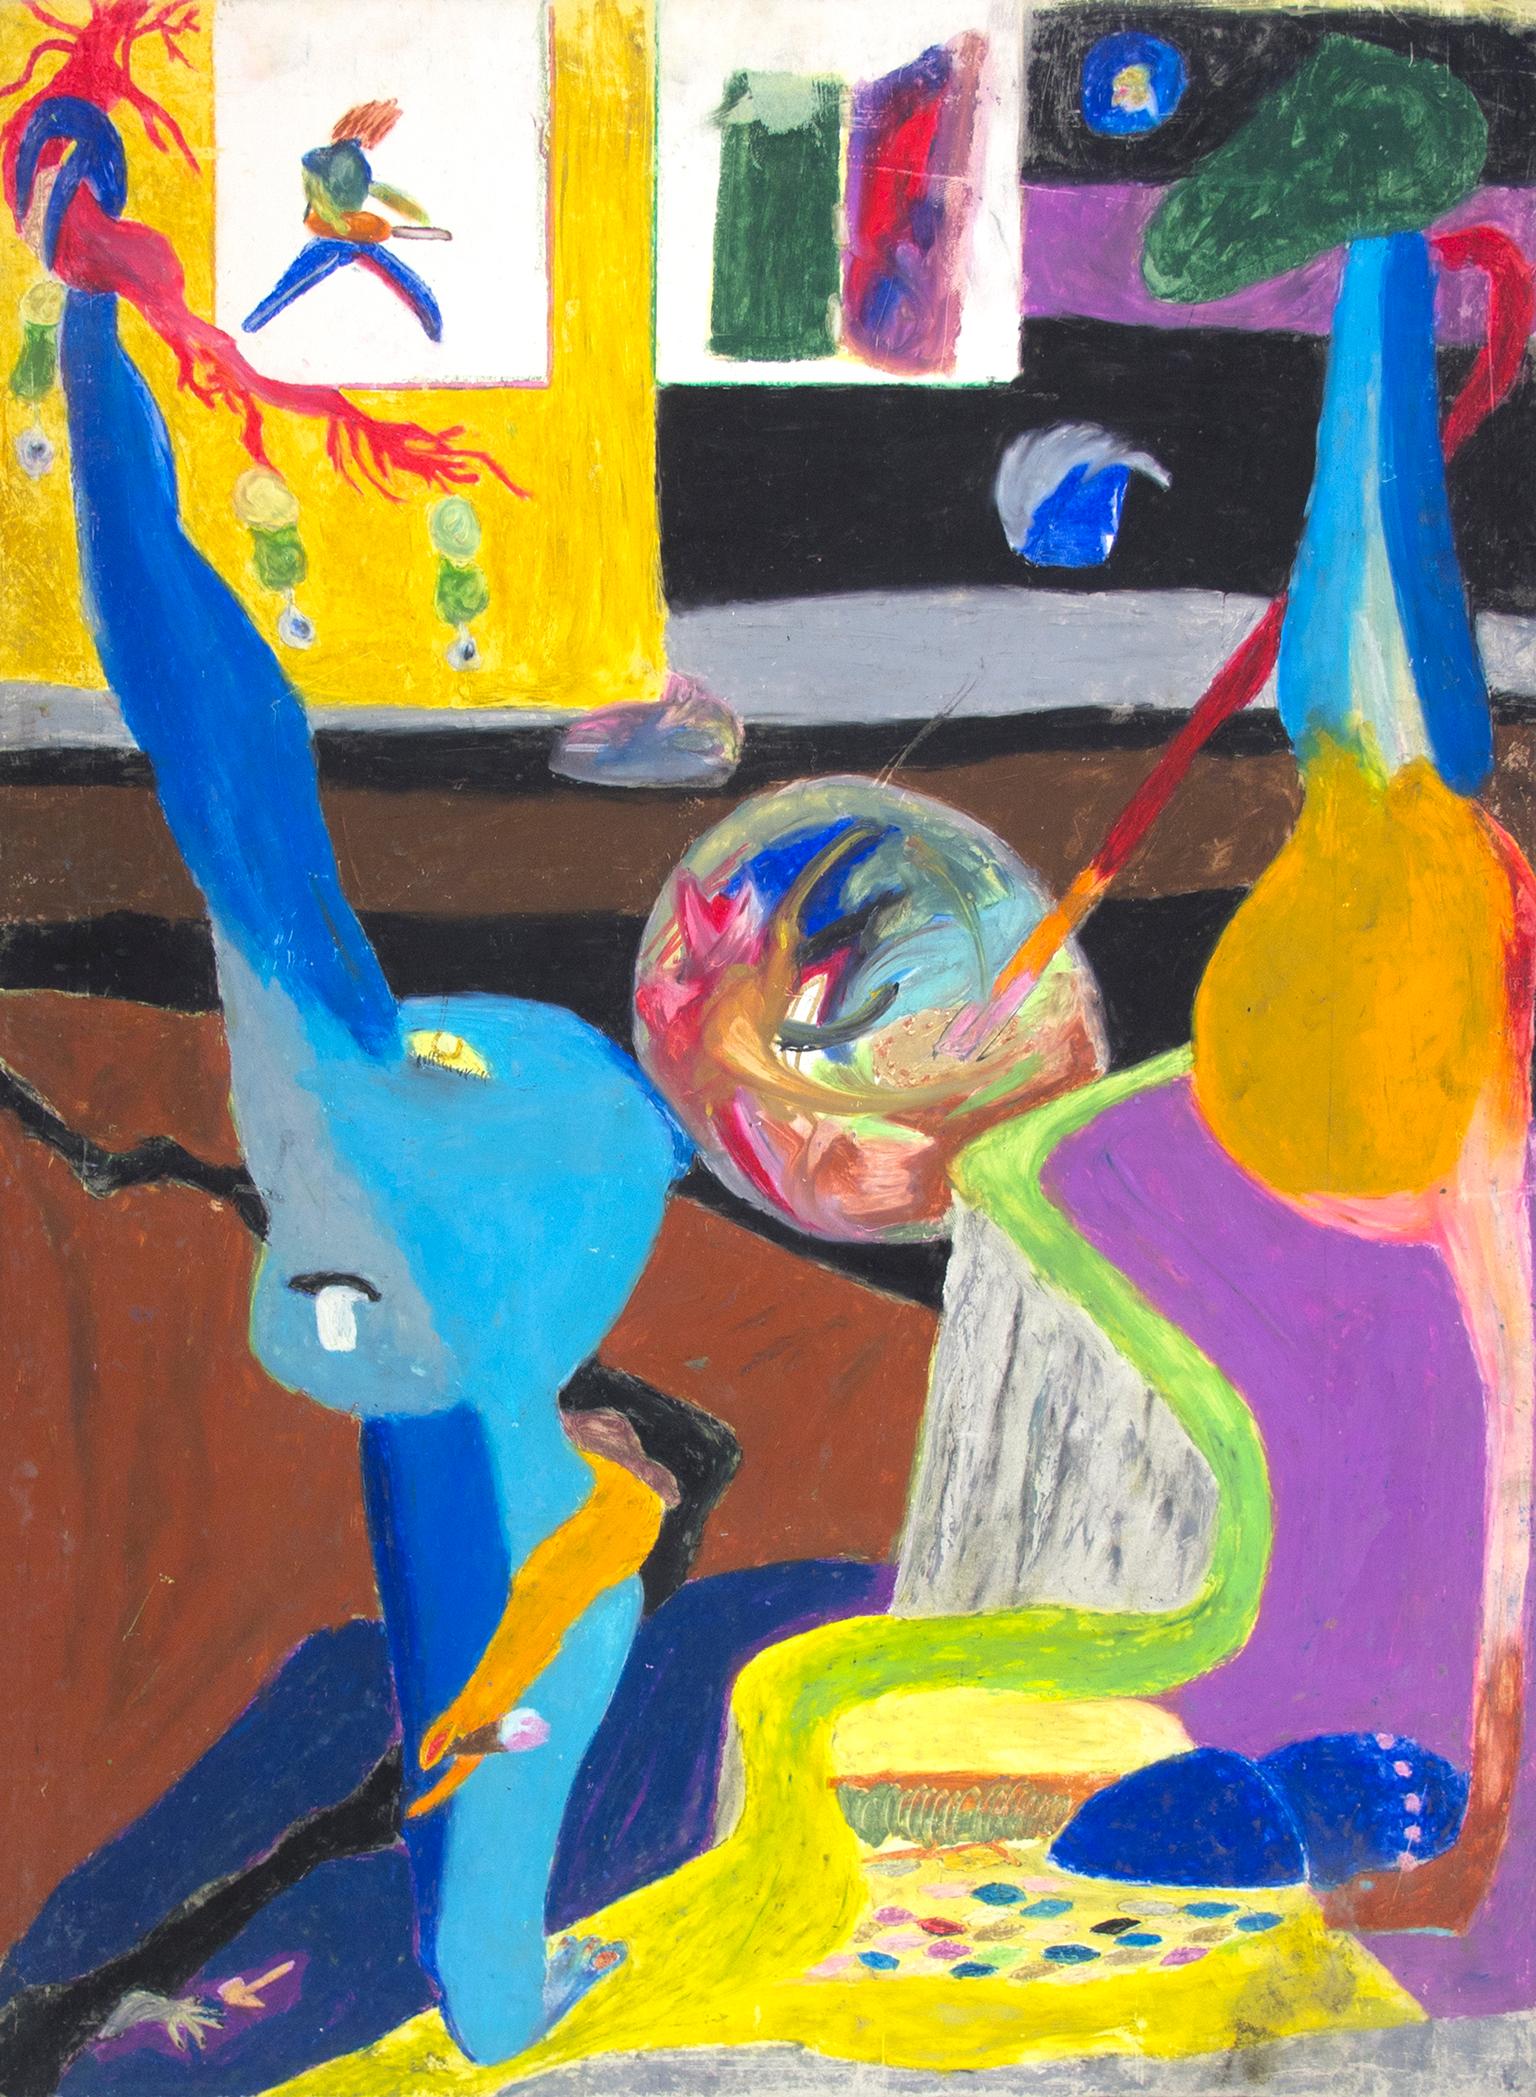 "Creatures" is an original oil pastel drawing on illustration board by Reginald K. Gee. The artist signed the piece on the back. It features abstracted "creatures" in bright colors. 

40" x 30" art

Reginald K. Gee was born in Milwaukee on April 28,